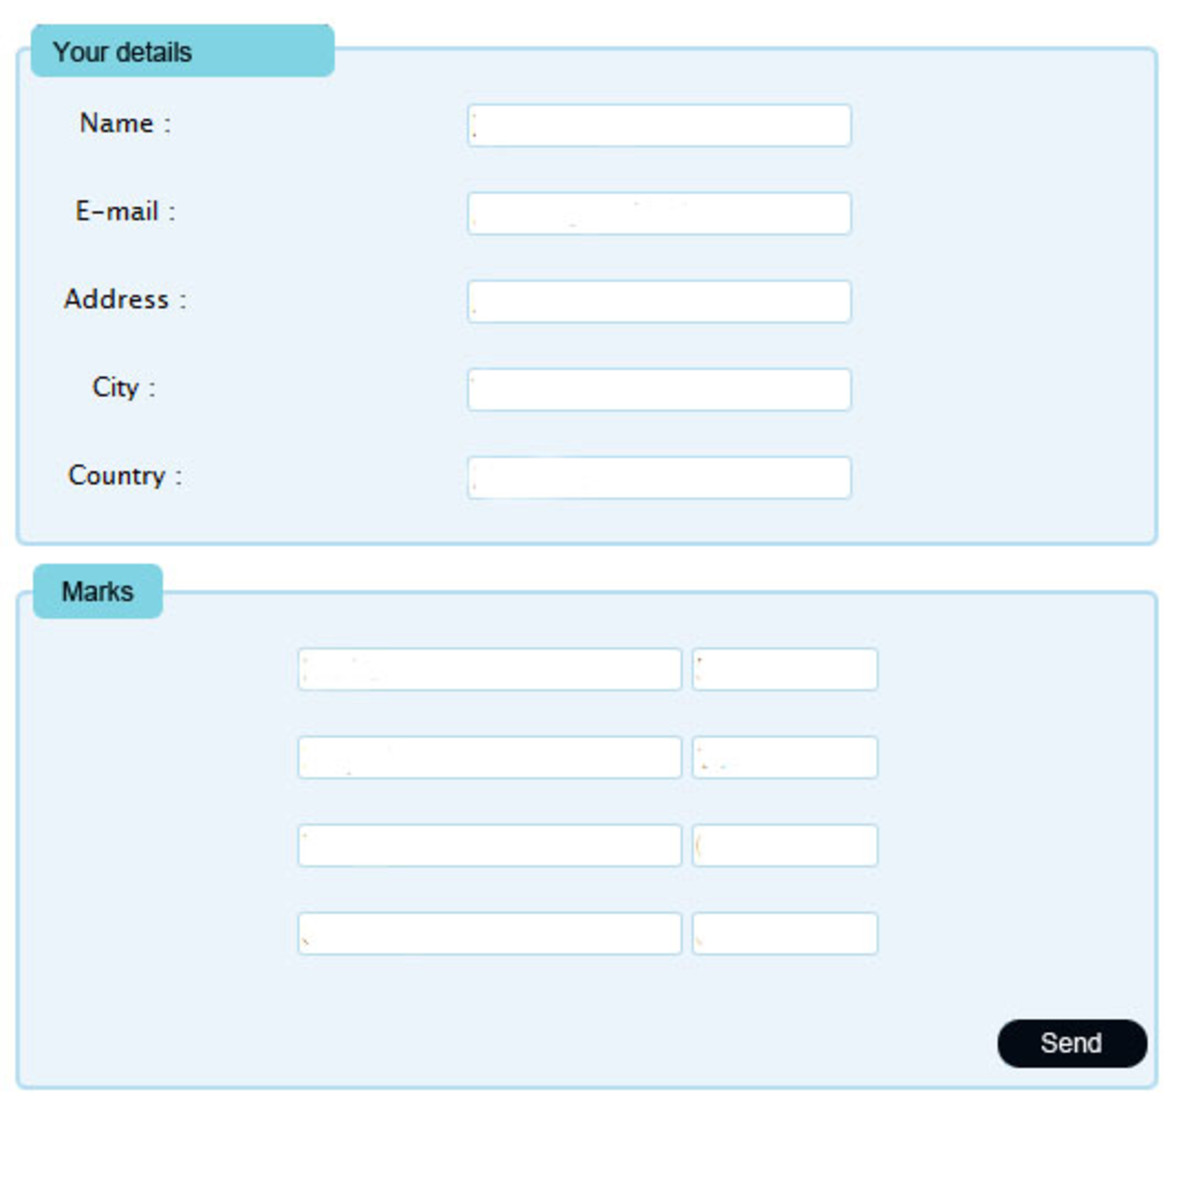 assignment on html forms